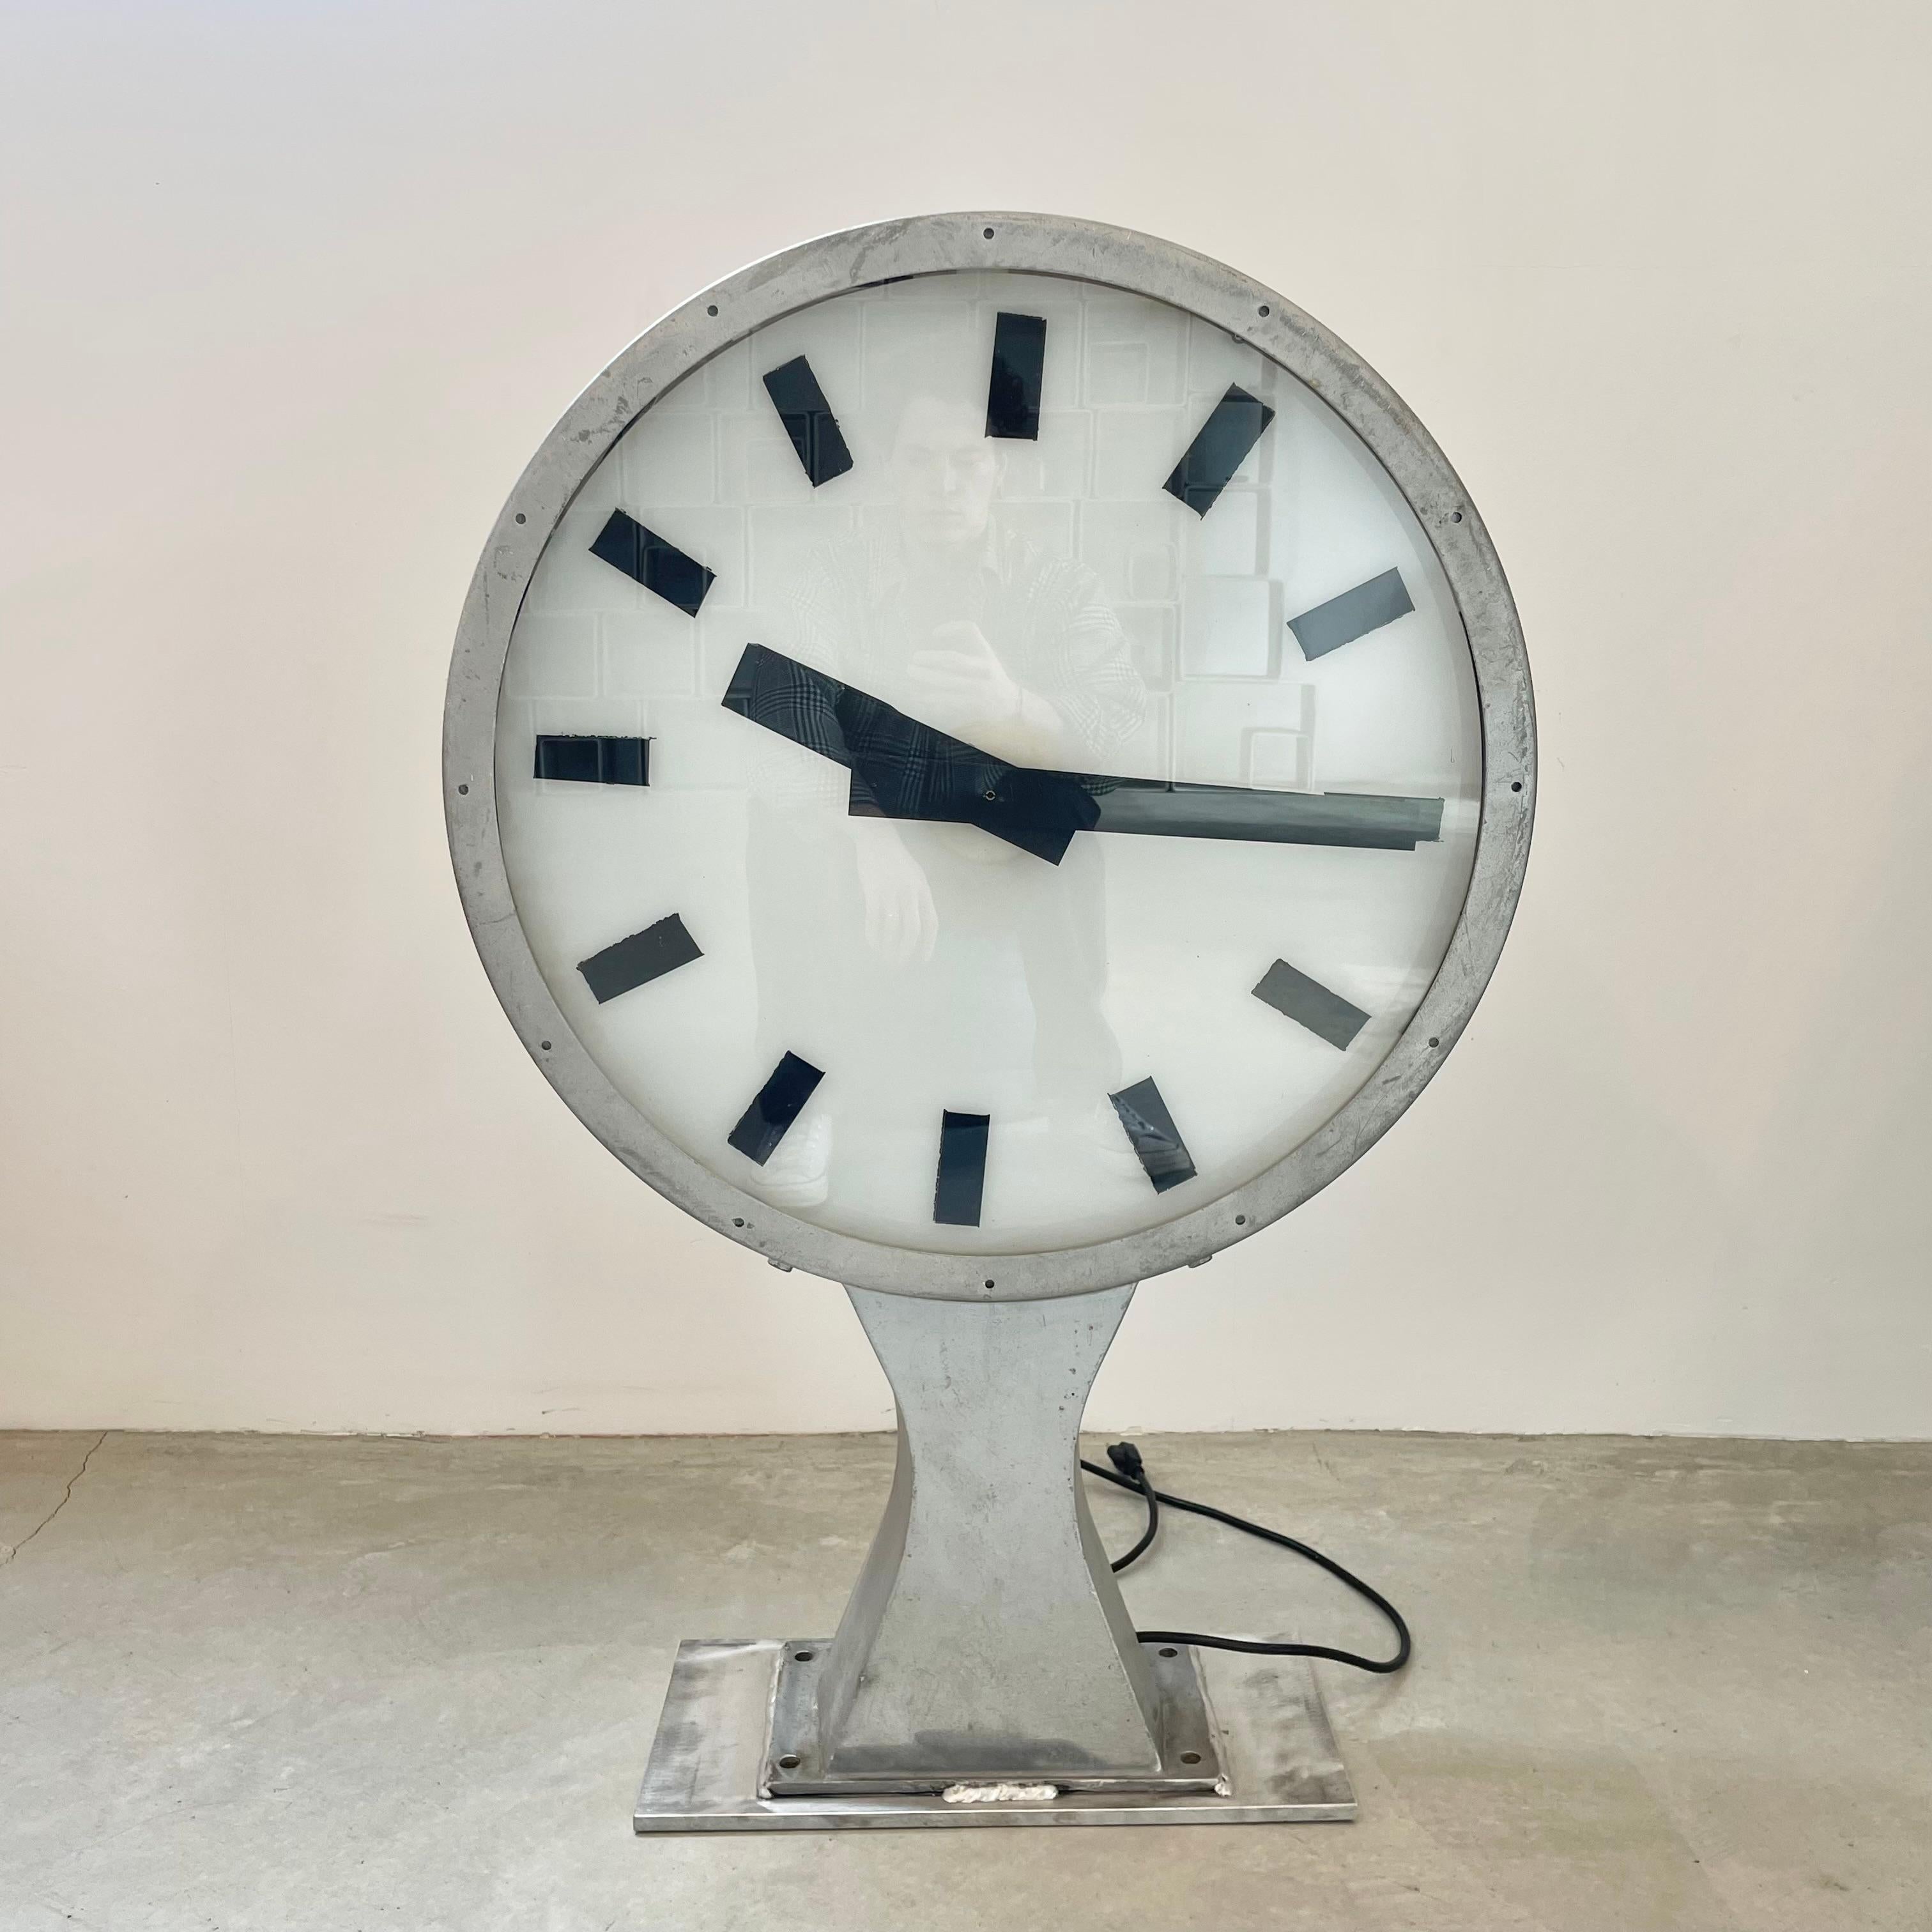 Fantastic double-sided illuminated railway station clock from Denmark circa 1960s. Each side can be set to a different time/ time-zone. Quintessential Scandinavian minimalist design. Fully functioning, working clock with new motors and internal